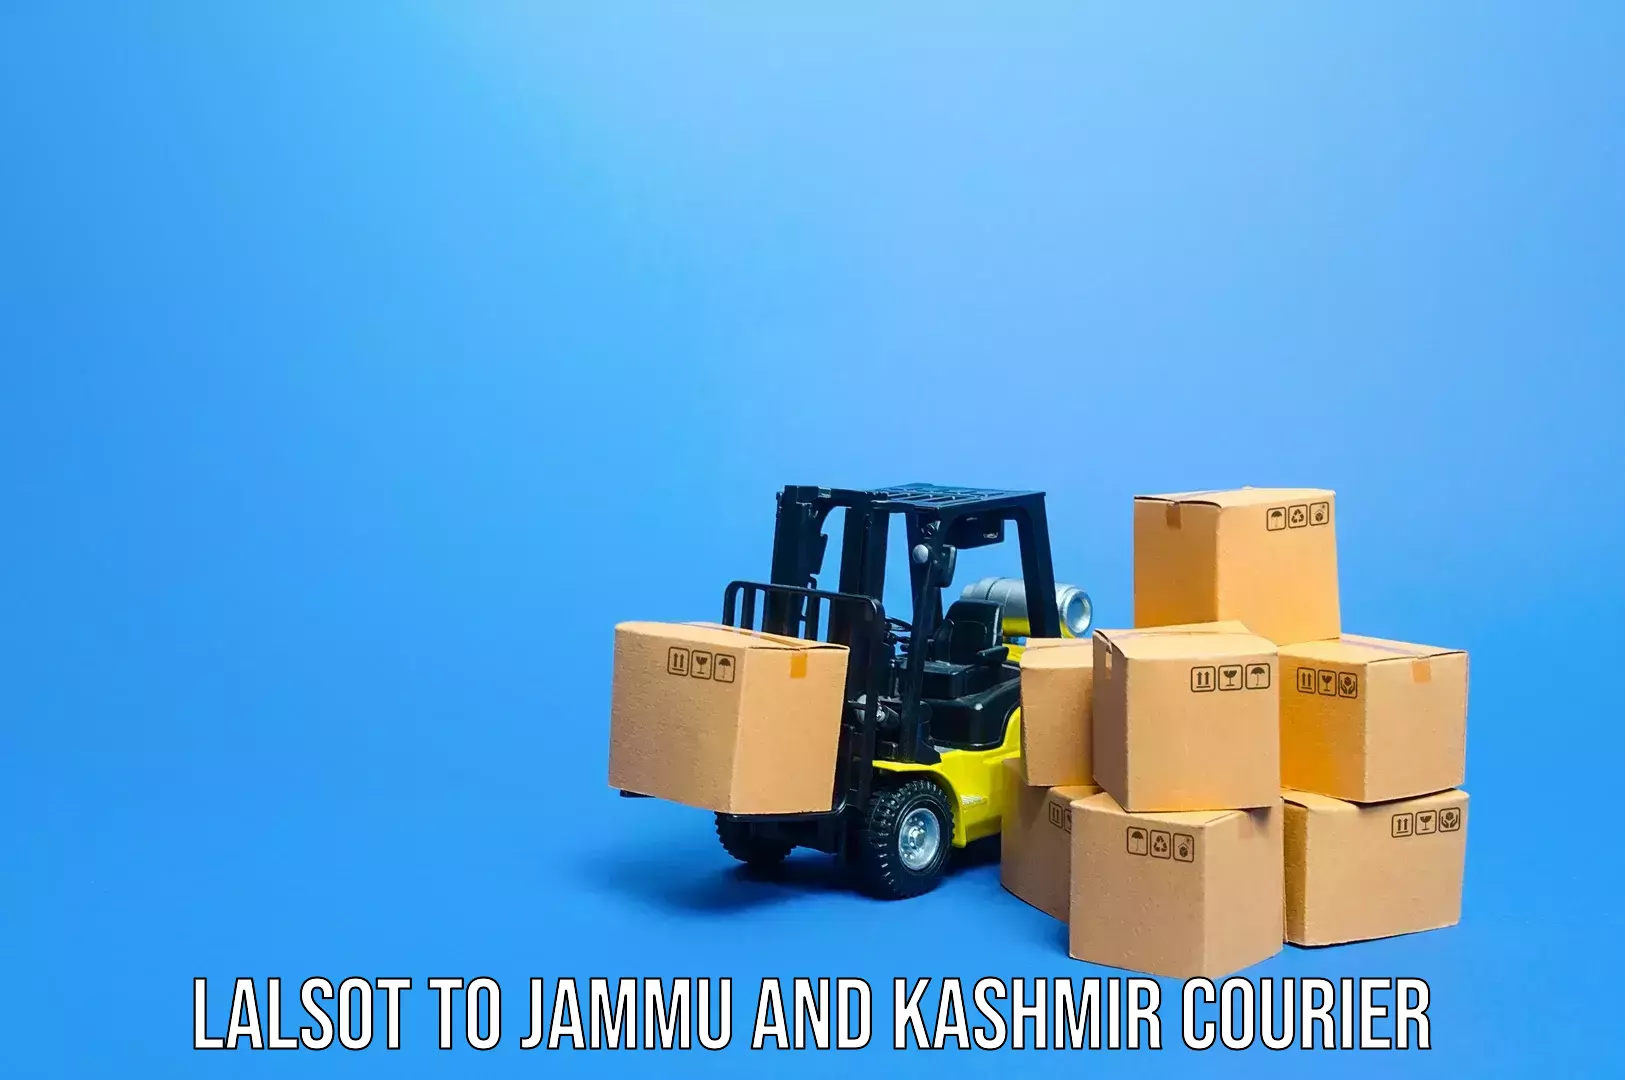 Luggage transport service Lalsot to Jammu and Kashmir